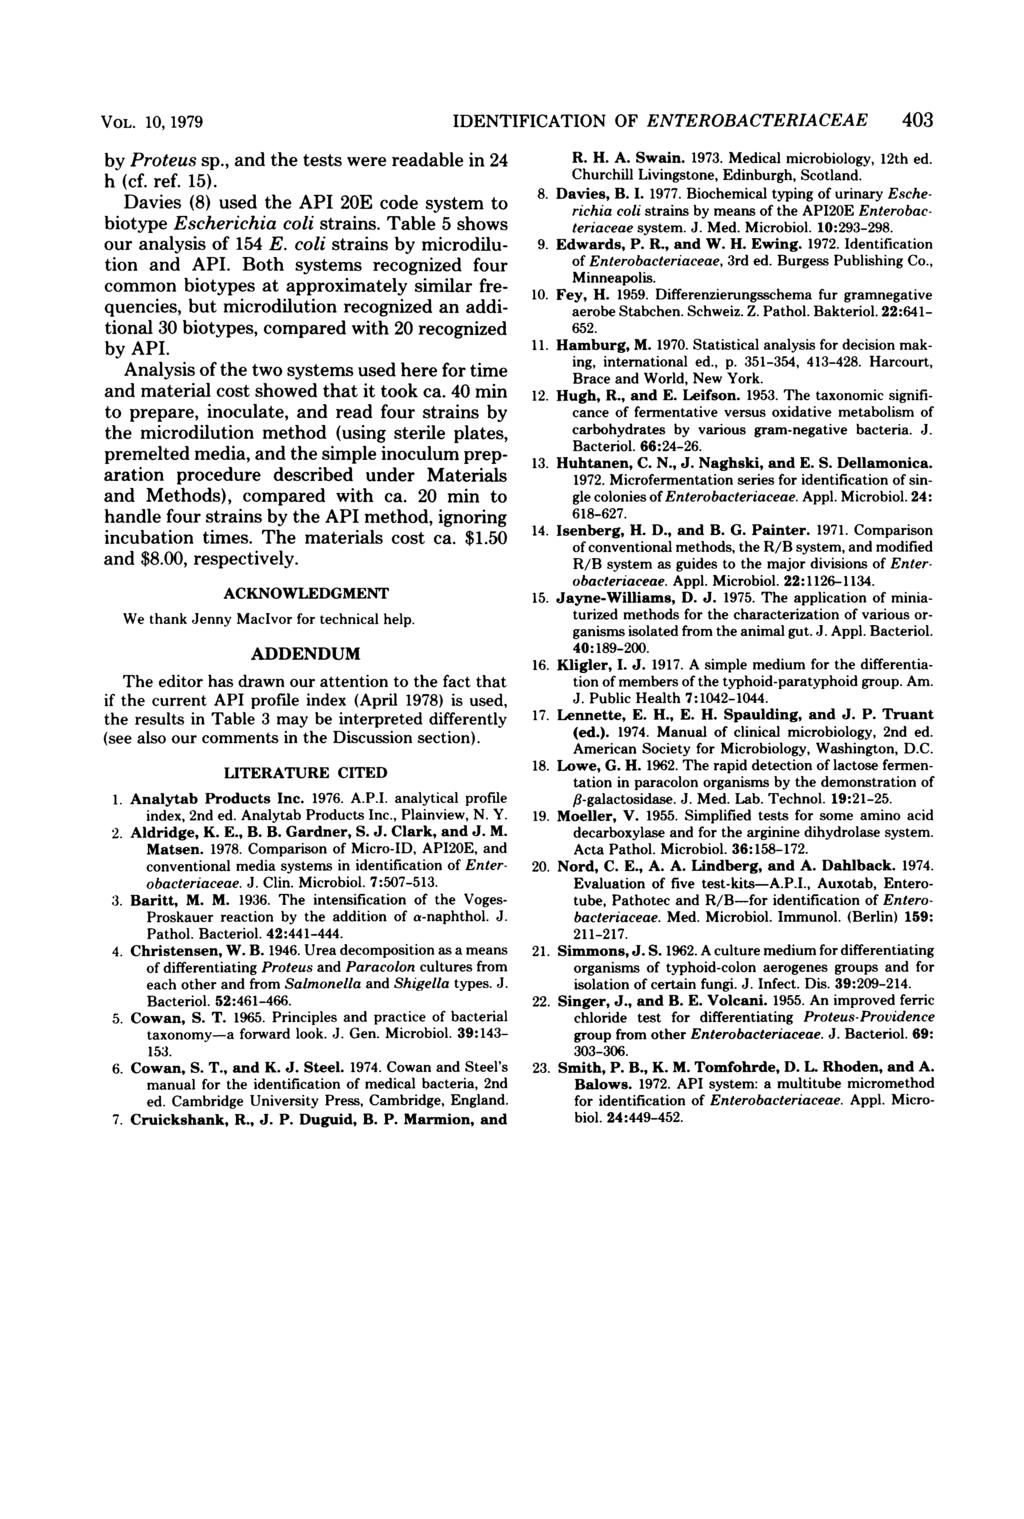 VOL. 10, 1979 by Proteus sp., and the tests were readable in 24 h (cf. ref. 15). Davies (8) used the API 20E code system to biotype Escherichia coli strains. Table 5 shows our analysis of 154 E.